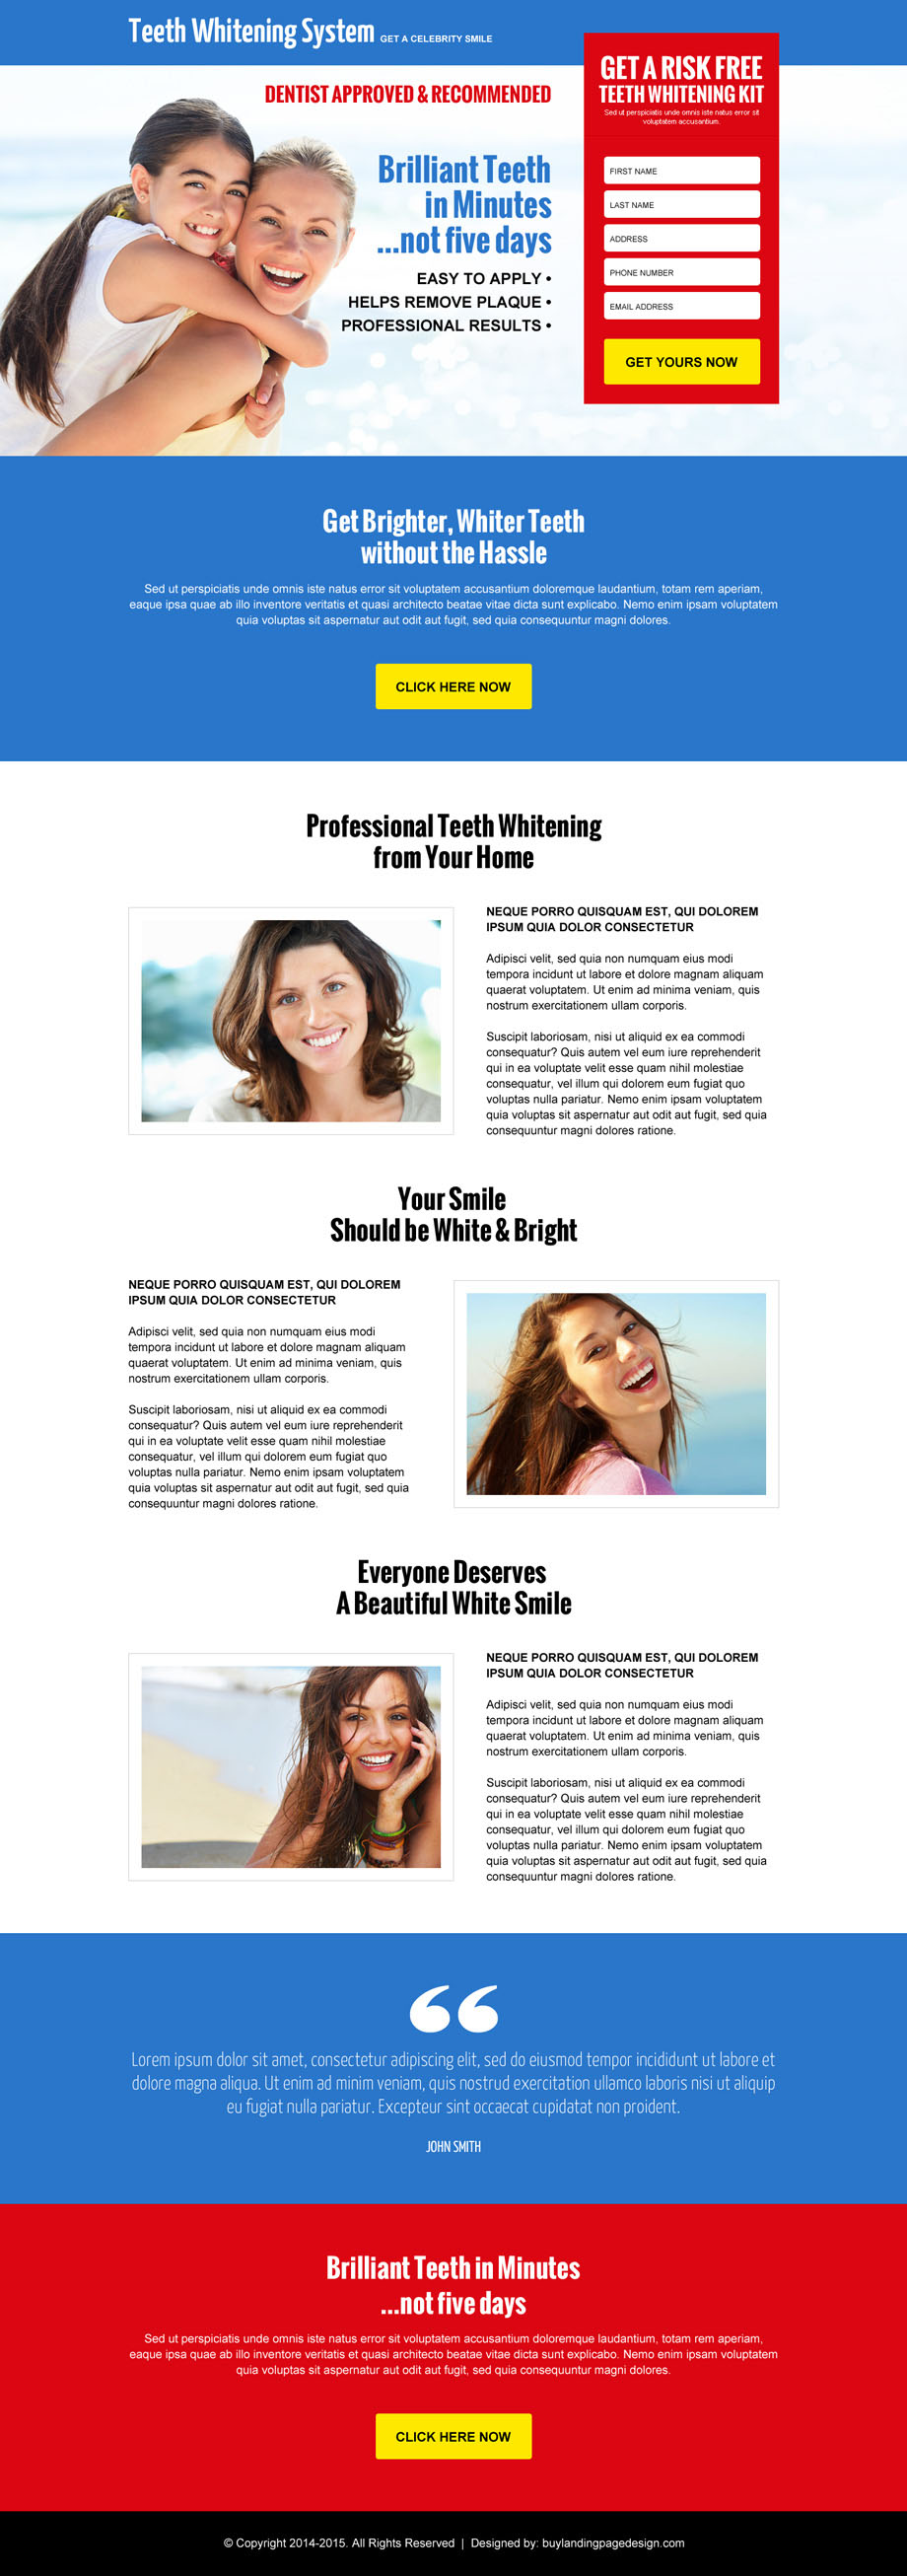 risk-free-teeth-whitening-kit-selling-lead-capture-converting-landing-page-design-template-016